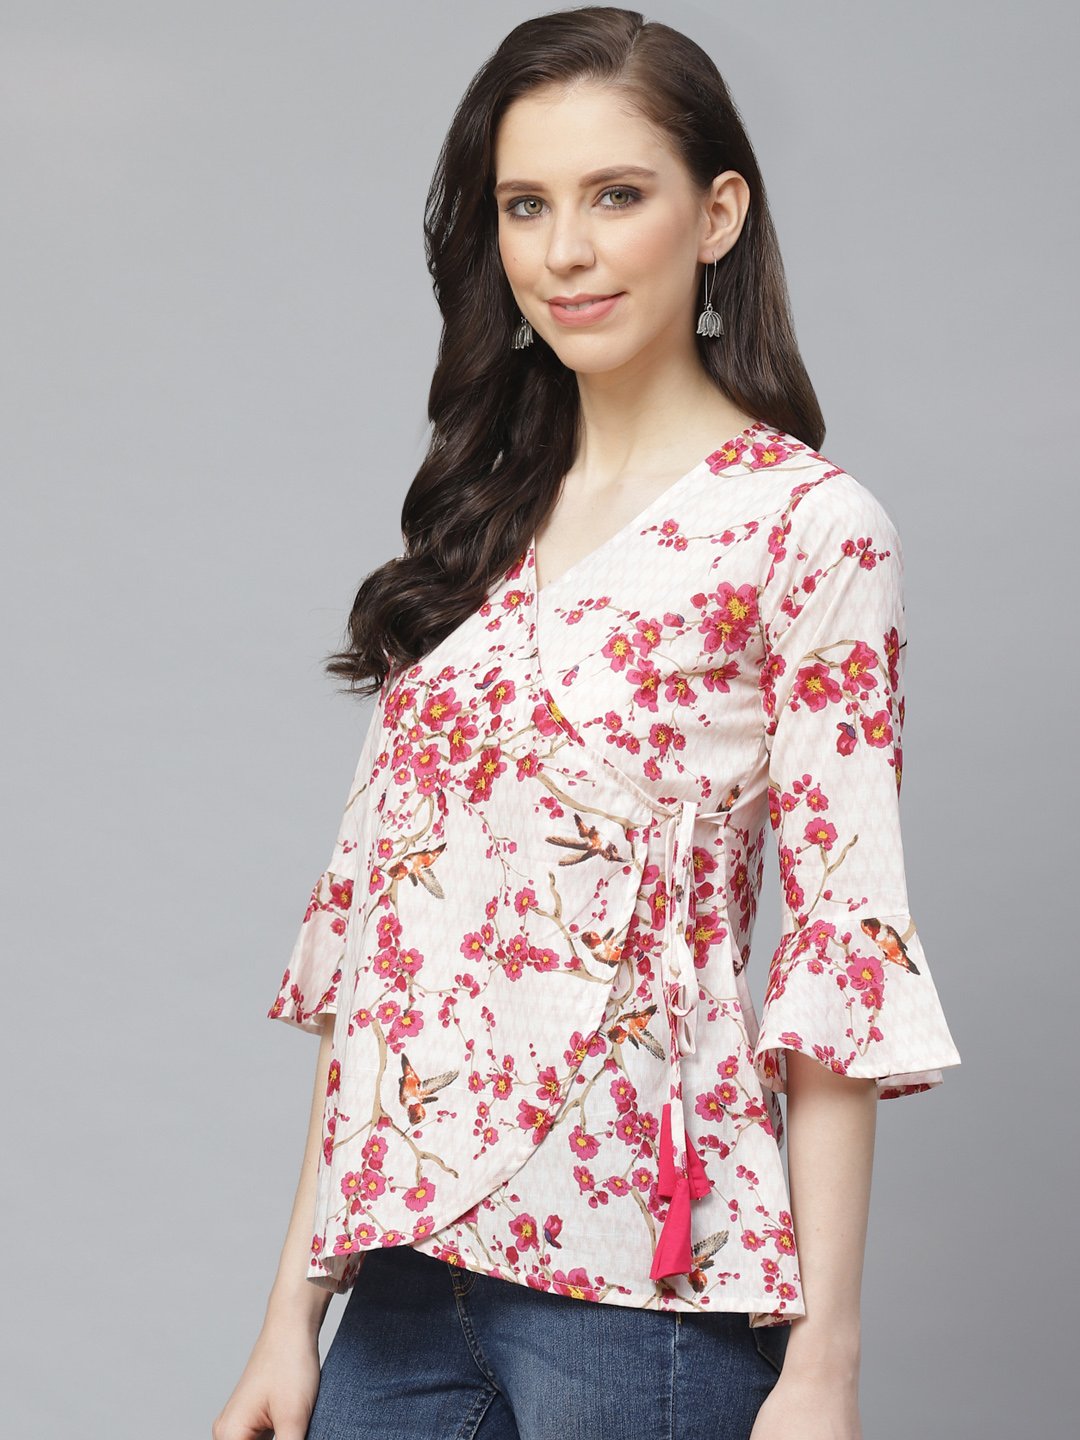 Women's Off White & Pink Wrap Floral Printed V-Neck Top - Nayo Clothing